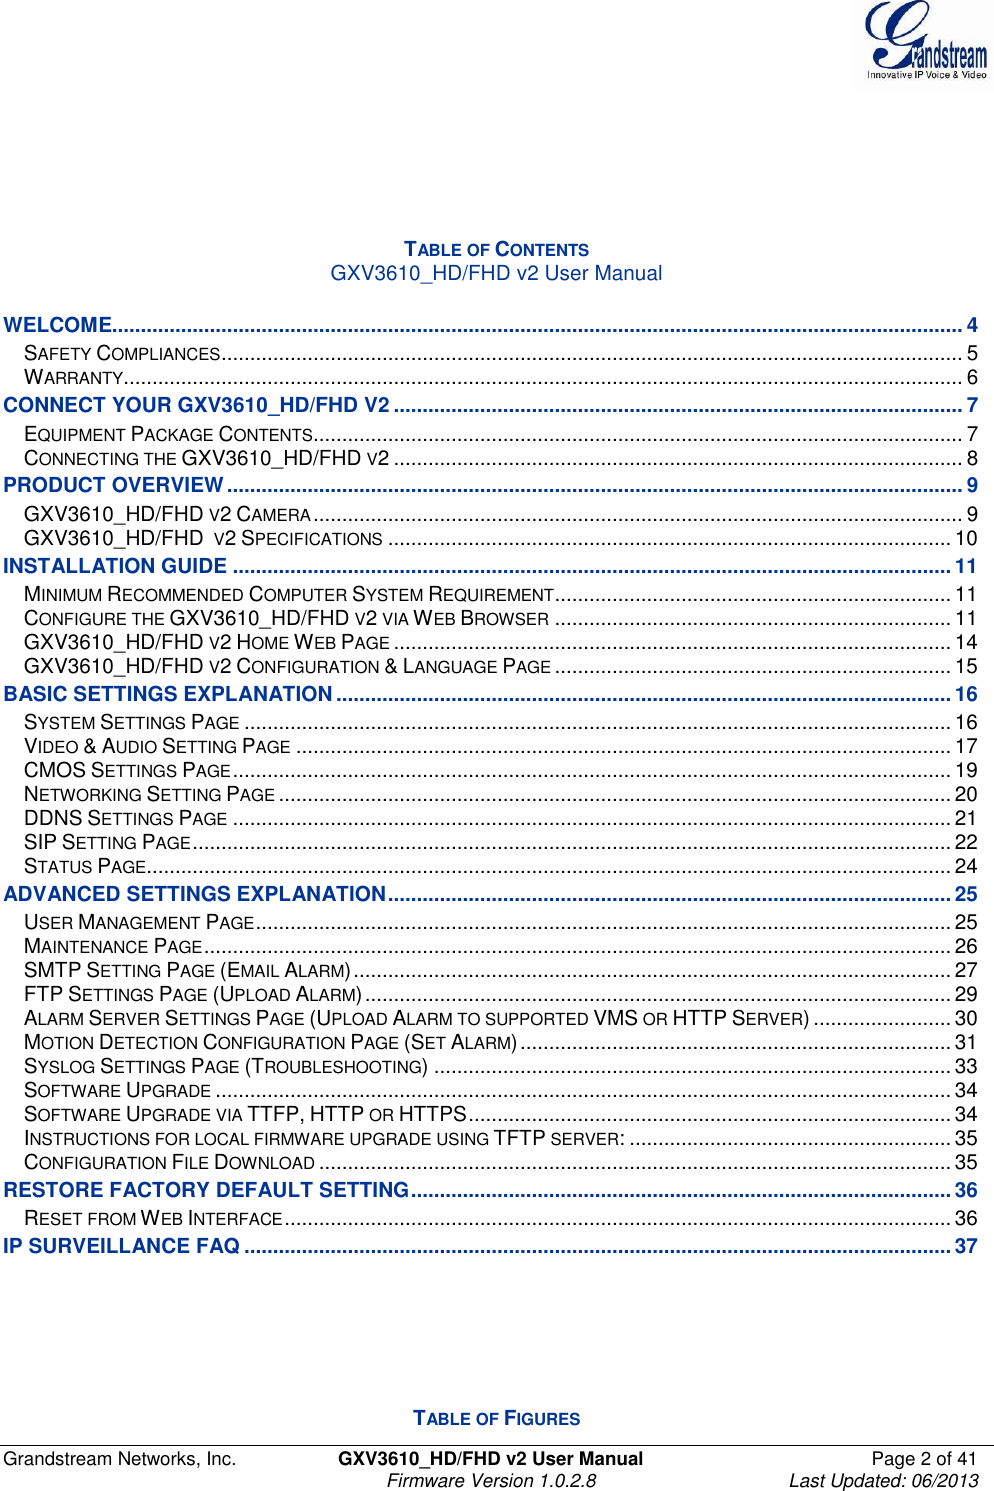  Grandstream Networks, Inc.  GXV3610_HD/FHD v2 User Manual  Page 2 of 41    Firmware Version 1.0.2.8  Last Updated: 06/2013       TABLE OF CONTENTS GXV3610_HD/FHD v2 User Manual  WELCOME.................................................................................................................................................... 4 SAFETY COMPLIANCES ................................................................................................................................. 5 WARRANTY .................................................................................................................................................. 6 CONNECT YOUR GXV3610_HD/FHD V2 ................................................................................................... 7 EQUIPMENT PACKAGE CONTENTS ................................................................................................................. 7 CONNECTING THE GXV3610_HD/FHD V2 ................................................................................................... 8 PRODUCT OVERVIEW ................................................................................................................................ 9 GXV3610_HD/FHD V2 CAMERA ................................................................................................................. 9 GXV3610_HD/FHD  V2 SPECIFICATIONS .................................................................................................. 10 INSTALLATION GUIDE ............................................................................................................................. 11 MINIMUM RECOMMENDED COMPUTER SYSTEM REQUIREMENT ..................................................................... 11 CONFIGURE THE GXV3610_HD/FHD V2 VIA WEB BROWSER ..................................................................... 11 GXV3610_HD/FHD V2 HOME WEB PAGE ................................................................................................. 14 GXV3610_HD/FHD V2 CONFIGURATION &amp; LANGUAGE PAGE ..................................................................... 15 BASIC SETTINGS EXPLANATION ........................................................................................................... 16 SYSTEM SETTINGS PAGE ........................................................................................................................... 16 VIDEO &amp; AUDIO SETTING PAGE .................................................................................................................. 17 CMOS SETTINGS PAGE ............................................................................................................................. 19 NETWORKING SETTING PAGE ..................................................................................................................... 20 DDNS SETTINGS PAGE ............................................................................................................................. 21 SIP SETTING PAGE .................................................................................................................................... 22 STATUS PAGE ............................................................................................................................................ 24 ADVANCED SETTINGS EXPLANATION .................................................................................................. 25 USER MANAGEMENT PAGE ......................................................................................................................... 25 MAINTENANCE PAGE .................................................................................................................................. 26 SMTP SETTING PAGE (EMAIL ALARM) ........................................................................................................ 27 FTP SETTINGS PAGE (UPLOAD ALARM) ...................................................................................................... 29 ALARM SERVER SETTINGS PAGE (UPLOAD ALARM TO SUPPORTED VMS OR HTTP SERVER) ........................ 30 MOTION DETECTION CONFIGURATION PAGE (SET ALARM) ........................................................................... 31 SYSLOG SETTINGS PAGE (TROUBLESHOOTING) .......................................................................................... 33 SOFTWARE UPGRADE ................................................................................................................................ 34 SOFTWARE UPGRADE VIA TTFP, HTTP OR HTTPS .................................................................................... 34 INSTRUCTIONS FOR LOCAL FIRMWARE UPGRADE USING TFTP SERVER: ........................................................ 35 CONFIGURATION FILE DOWNLOAD .............................................................................................................. 35 RESTORE FACTORY DEFAULT SETTING .............................................................................................. 36 RESET FROM WEB INTERFACE .................................................................................................................... 36 IP SURVEILLANCE FAQ ........................................................................................................................... 37       TABLE OF FIGURES 